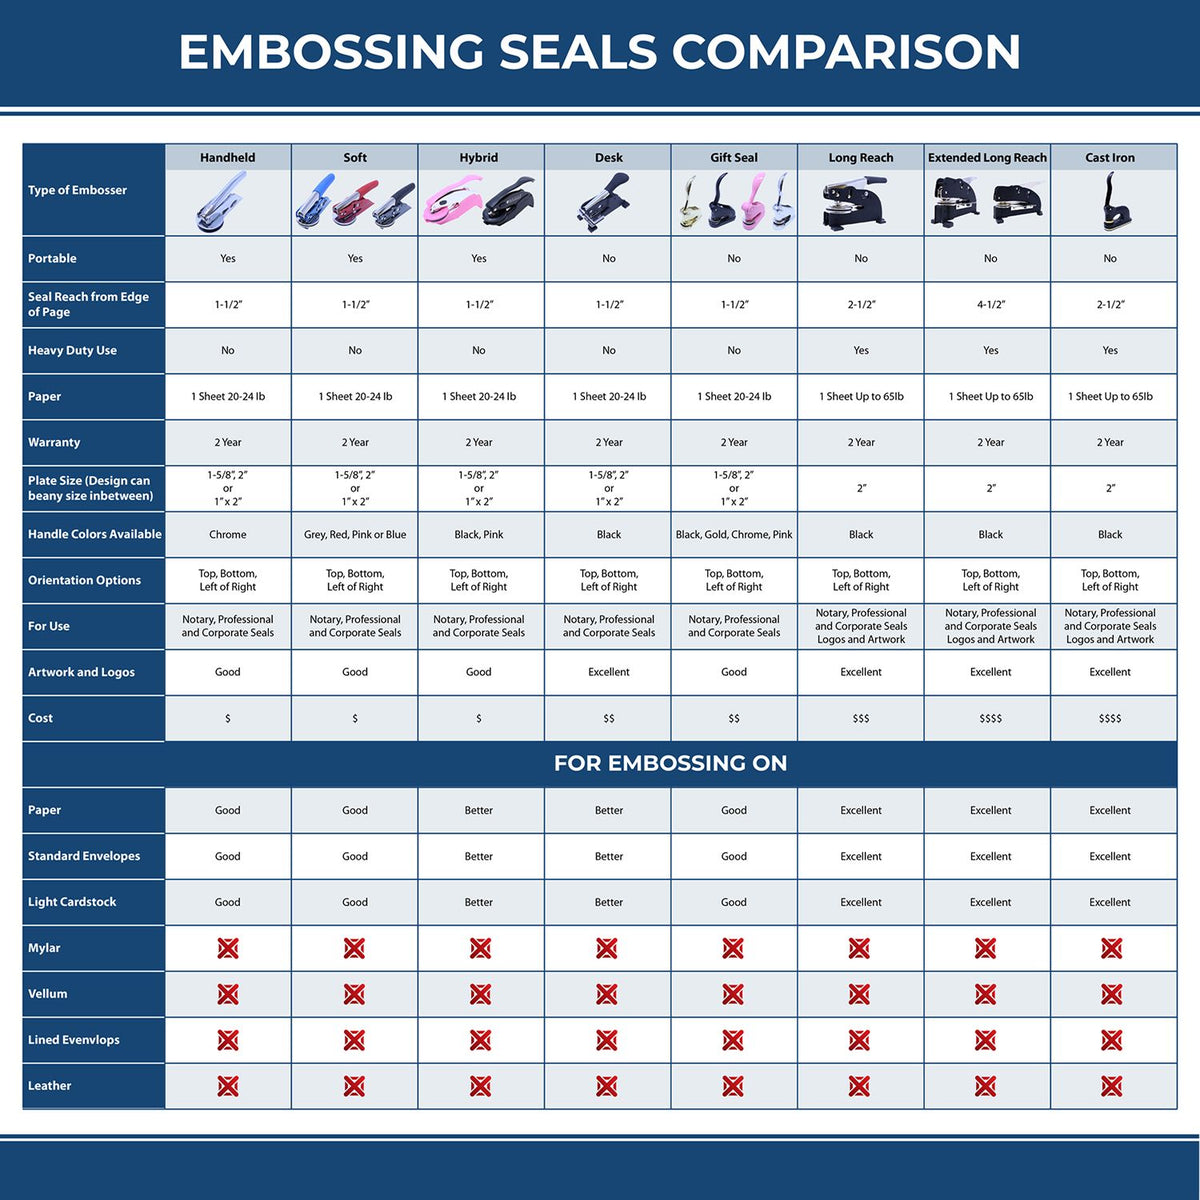 A comparison chart for the different types of mount models available for the State of Kentucky Extended Long Reach Geologist Seal